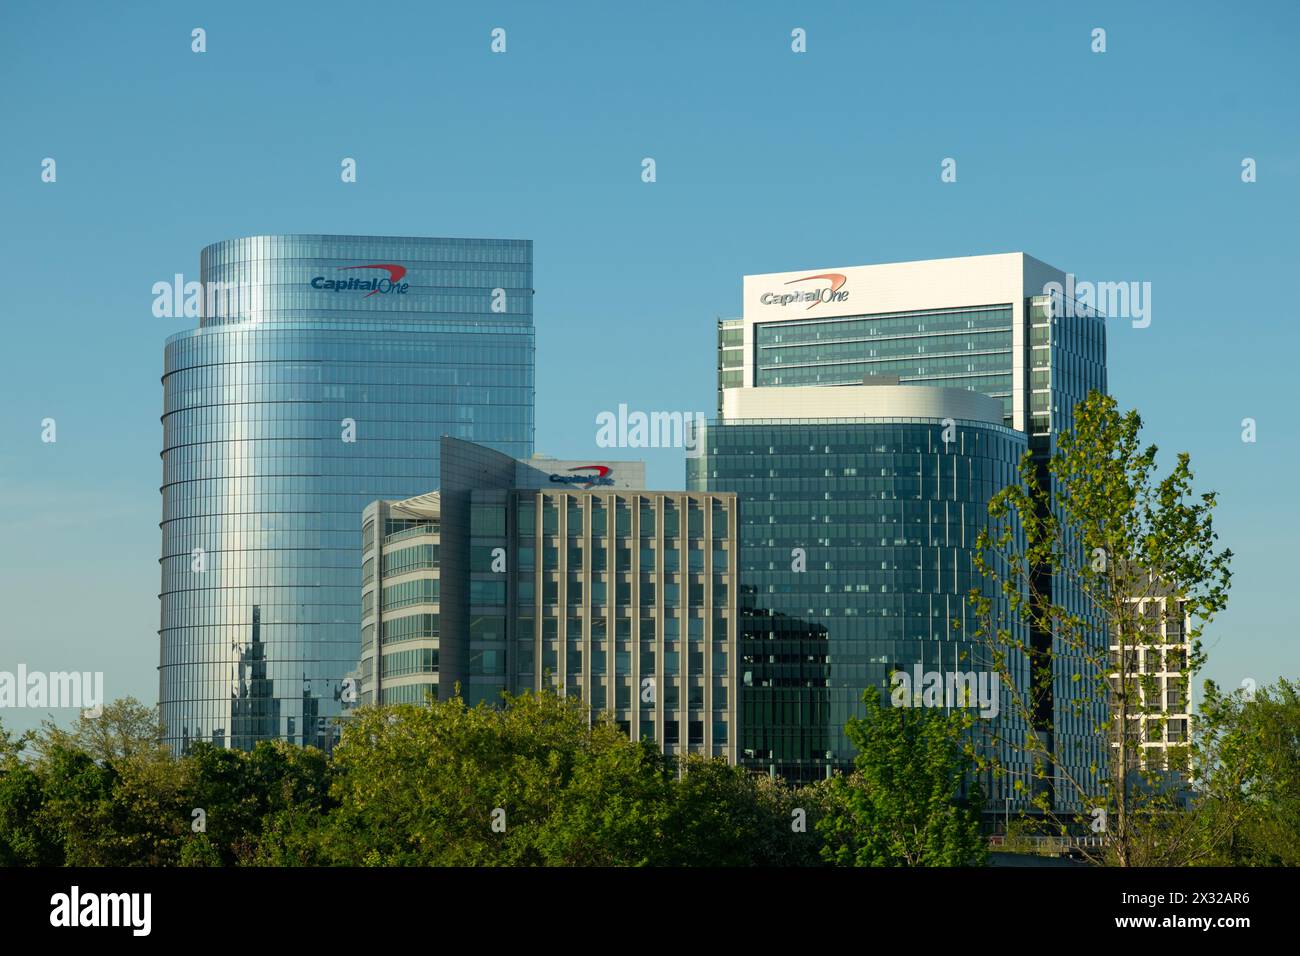 USA Business Capital One Financial Corp corporation in McLean Virginia headquarters complex Stock Photo